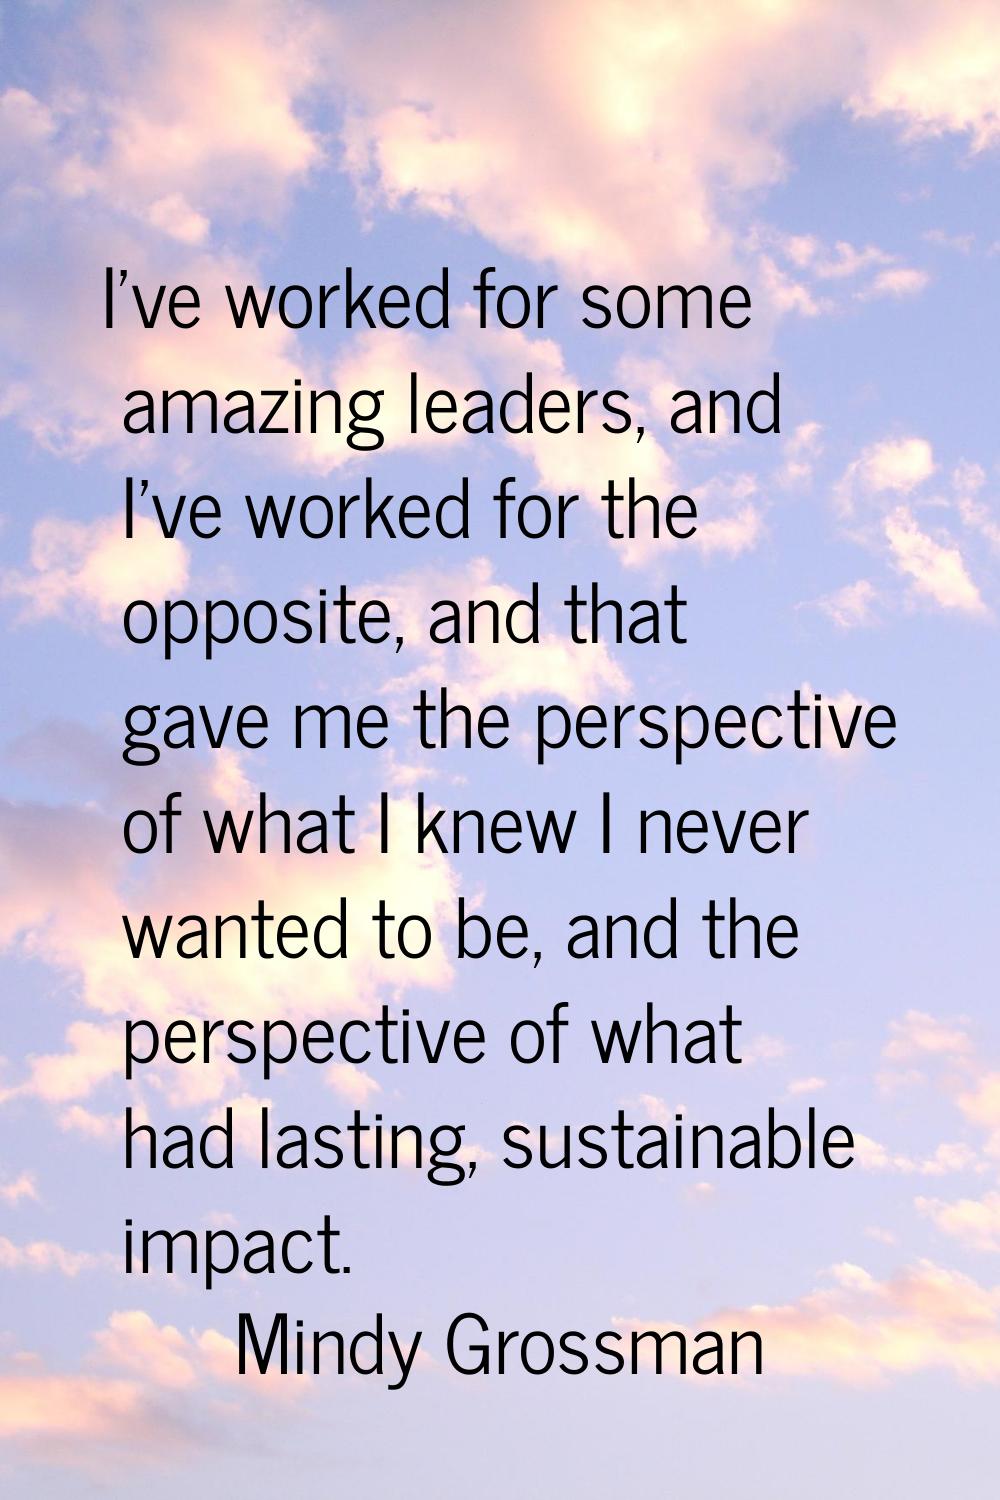 I've worked for some amazing leaders, and I've worked for the opposite, and that gave me the perspe